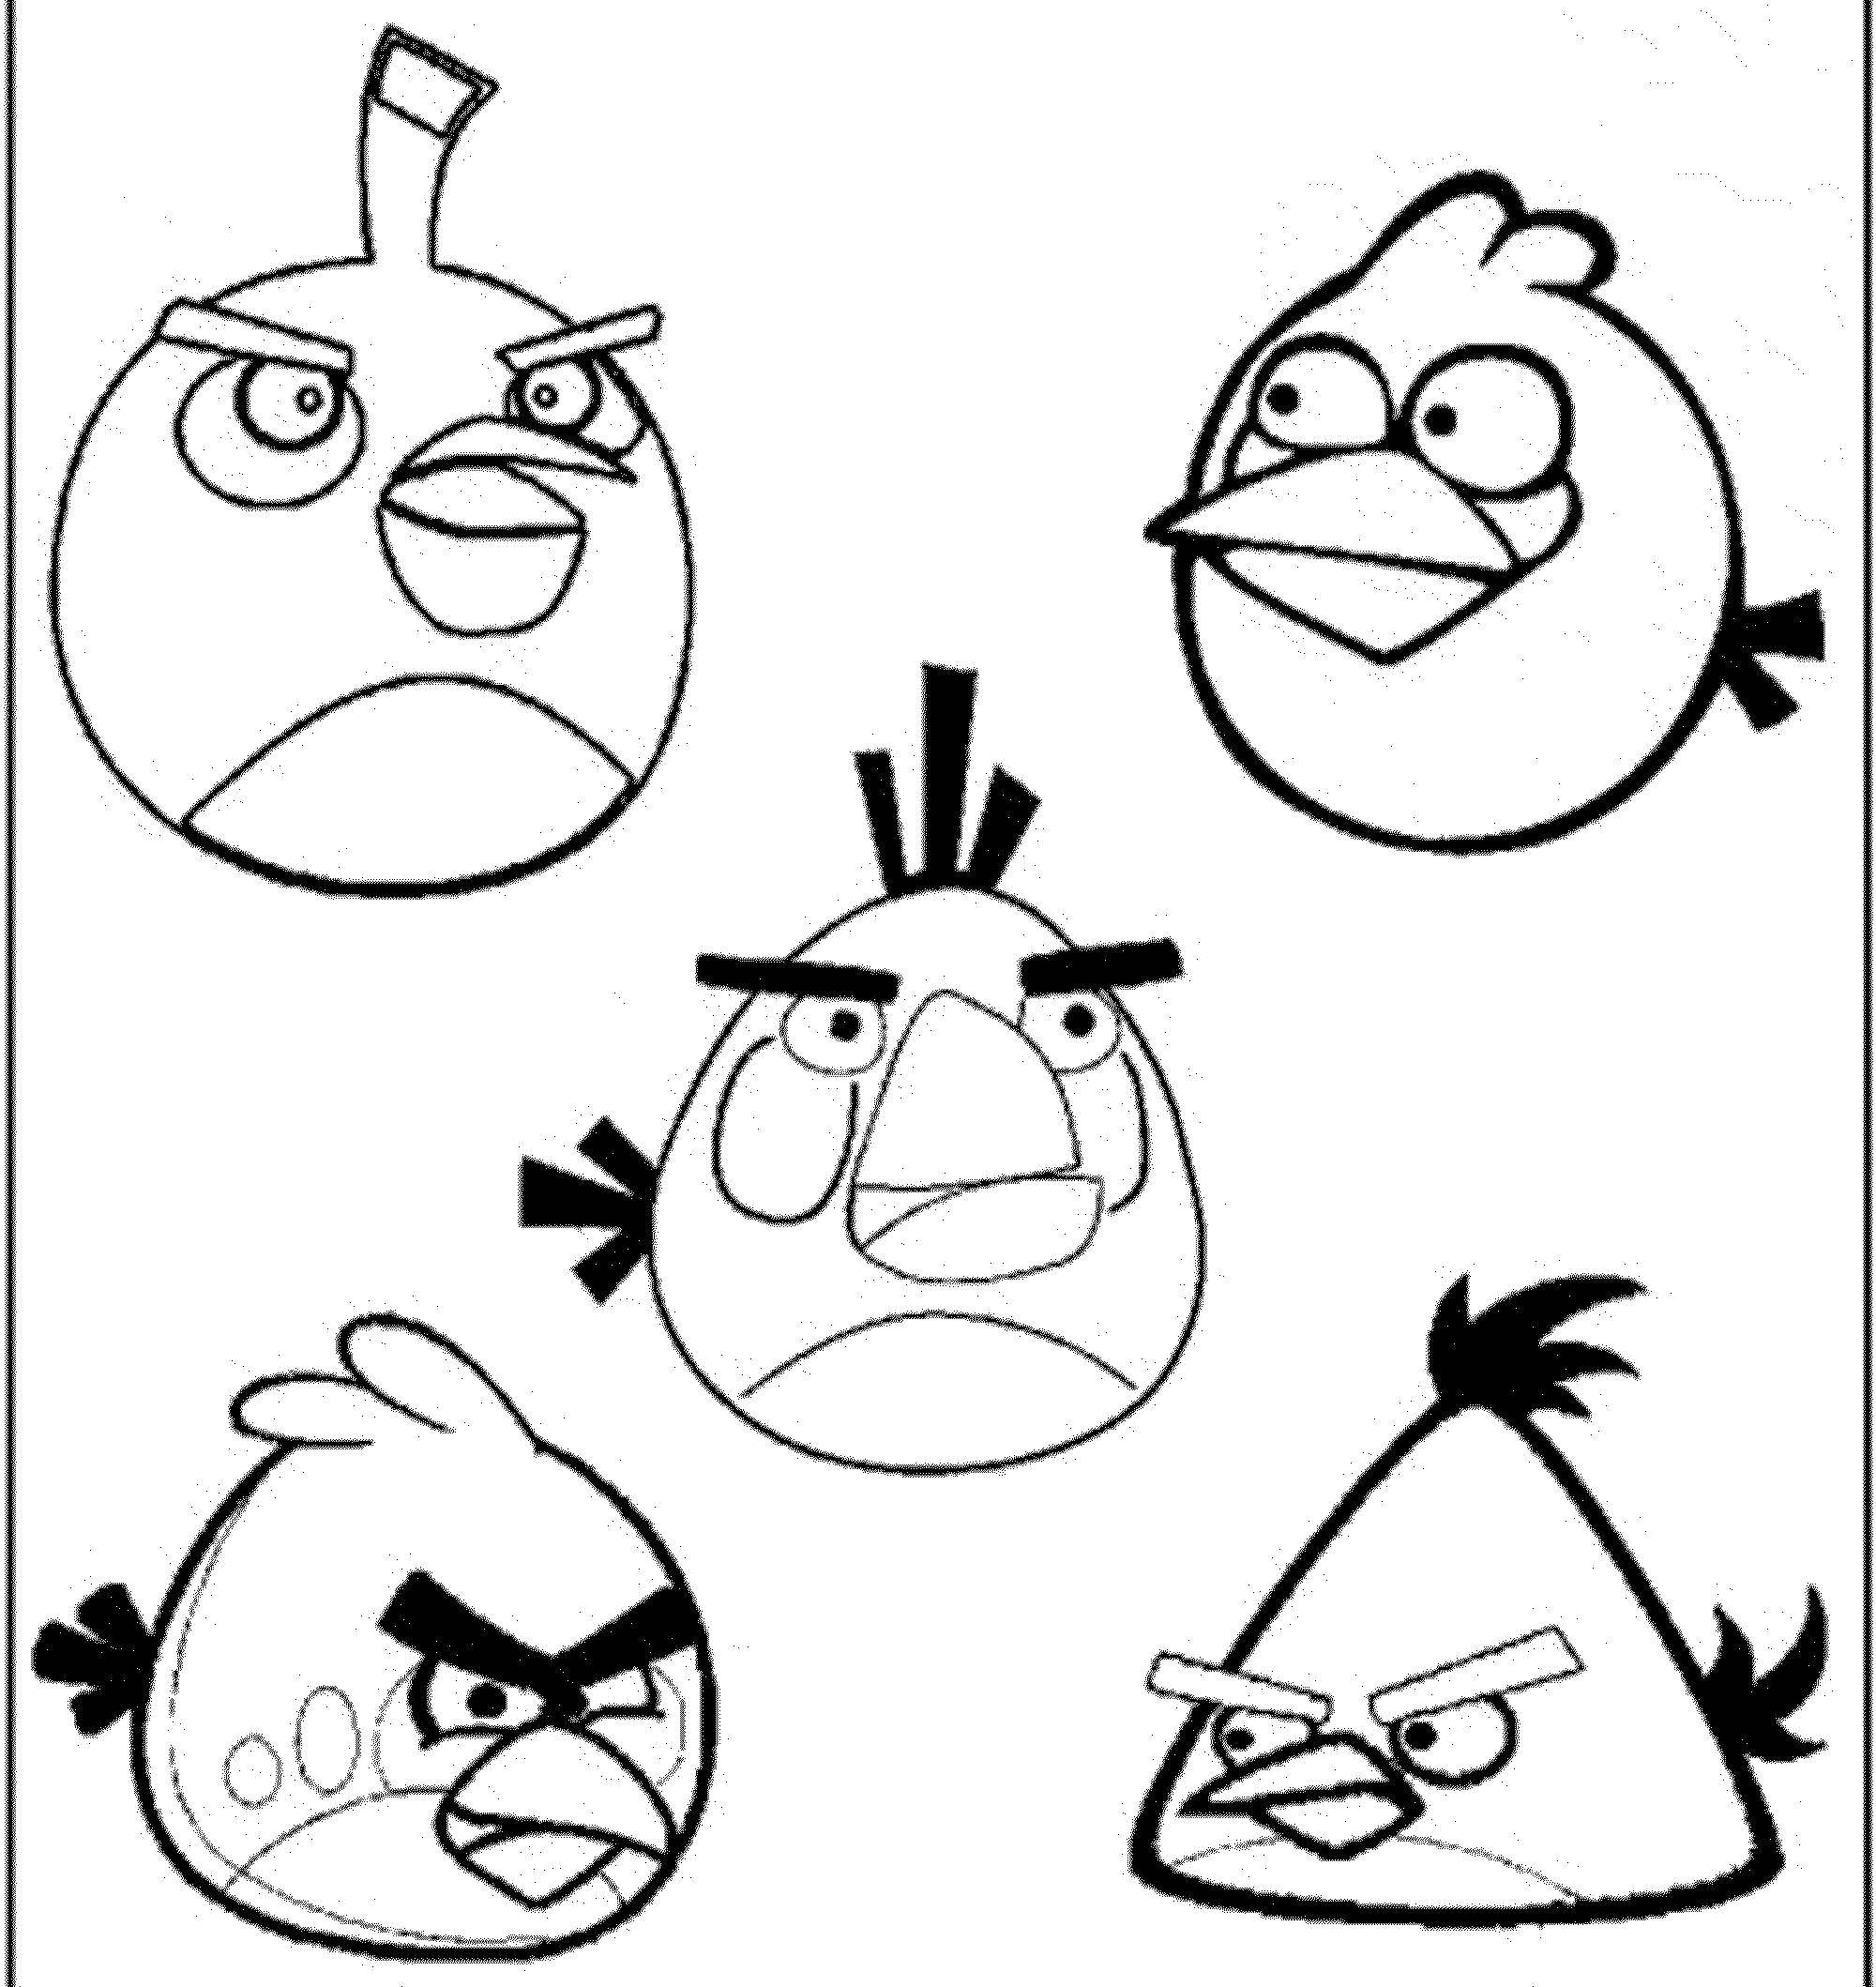 Coloring The birds from angry birds very angry. Category angry birds. Tags:  Games, Angry Birds .